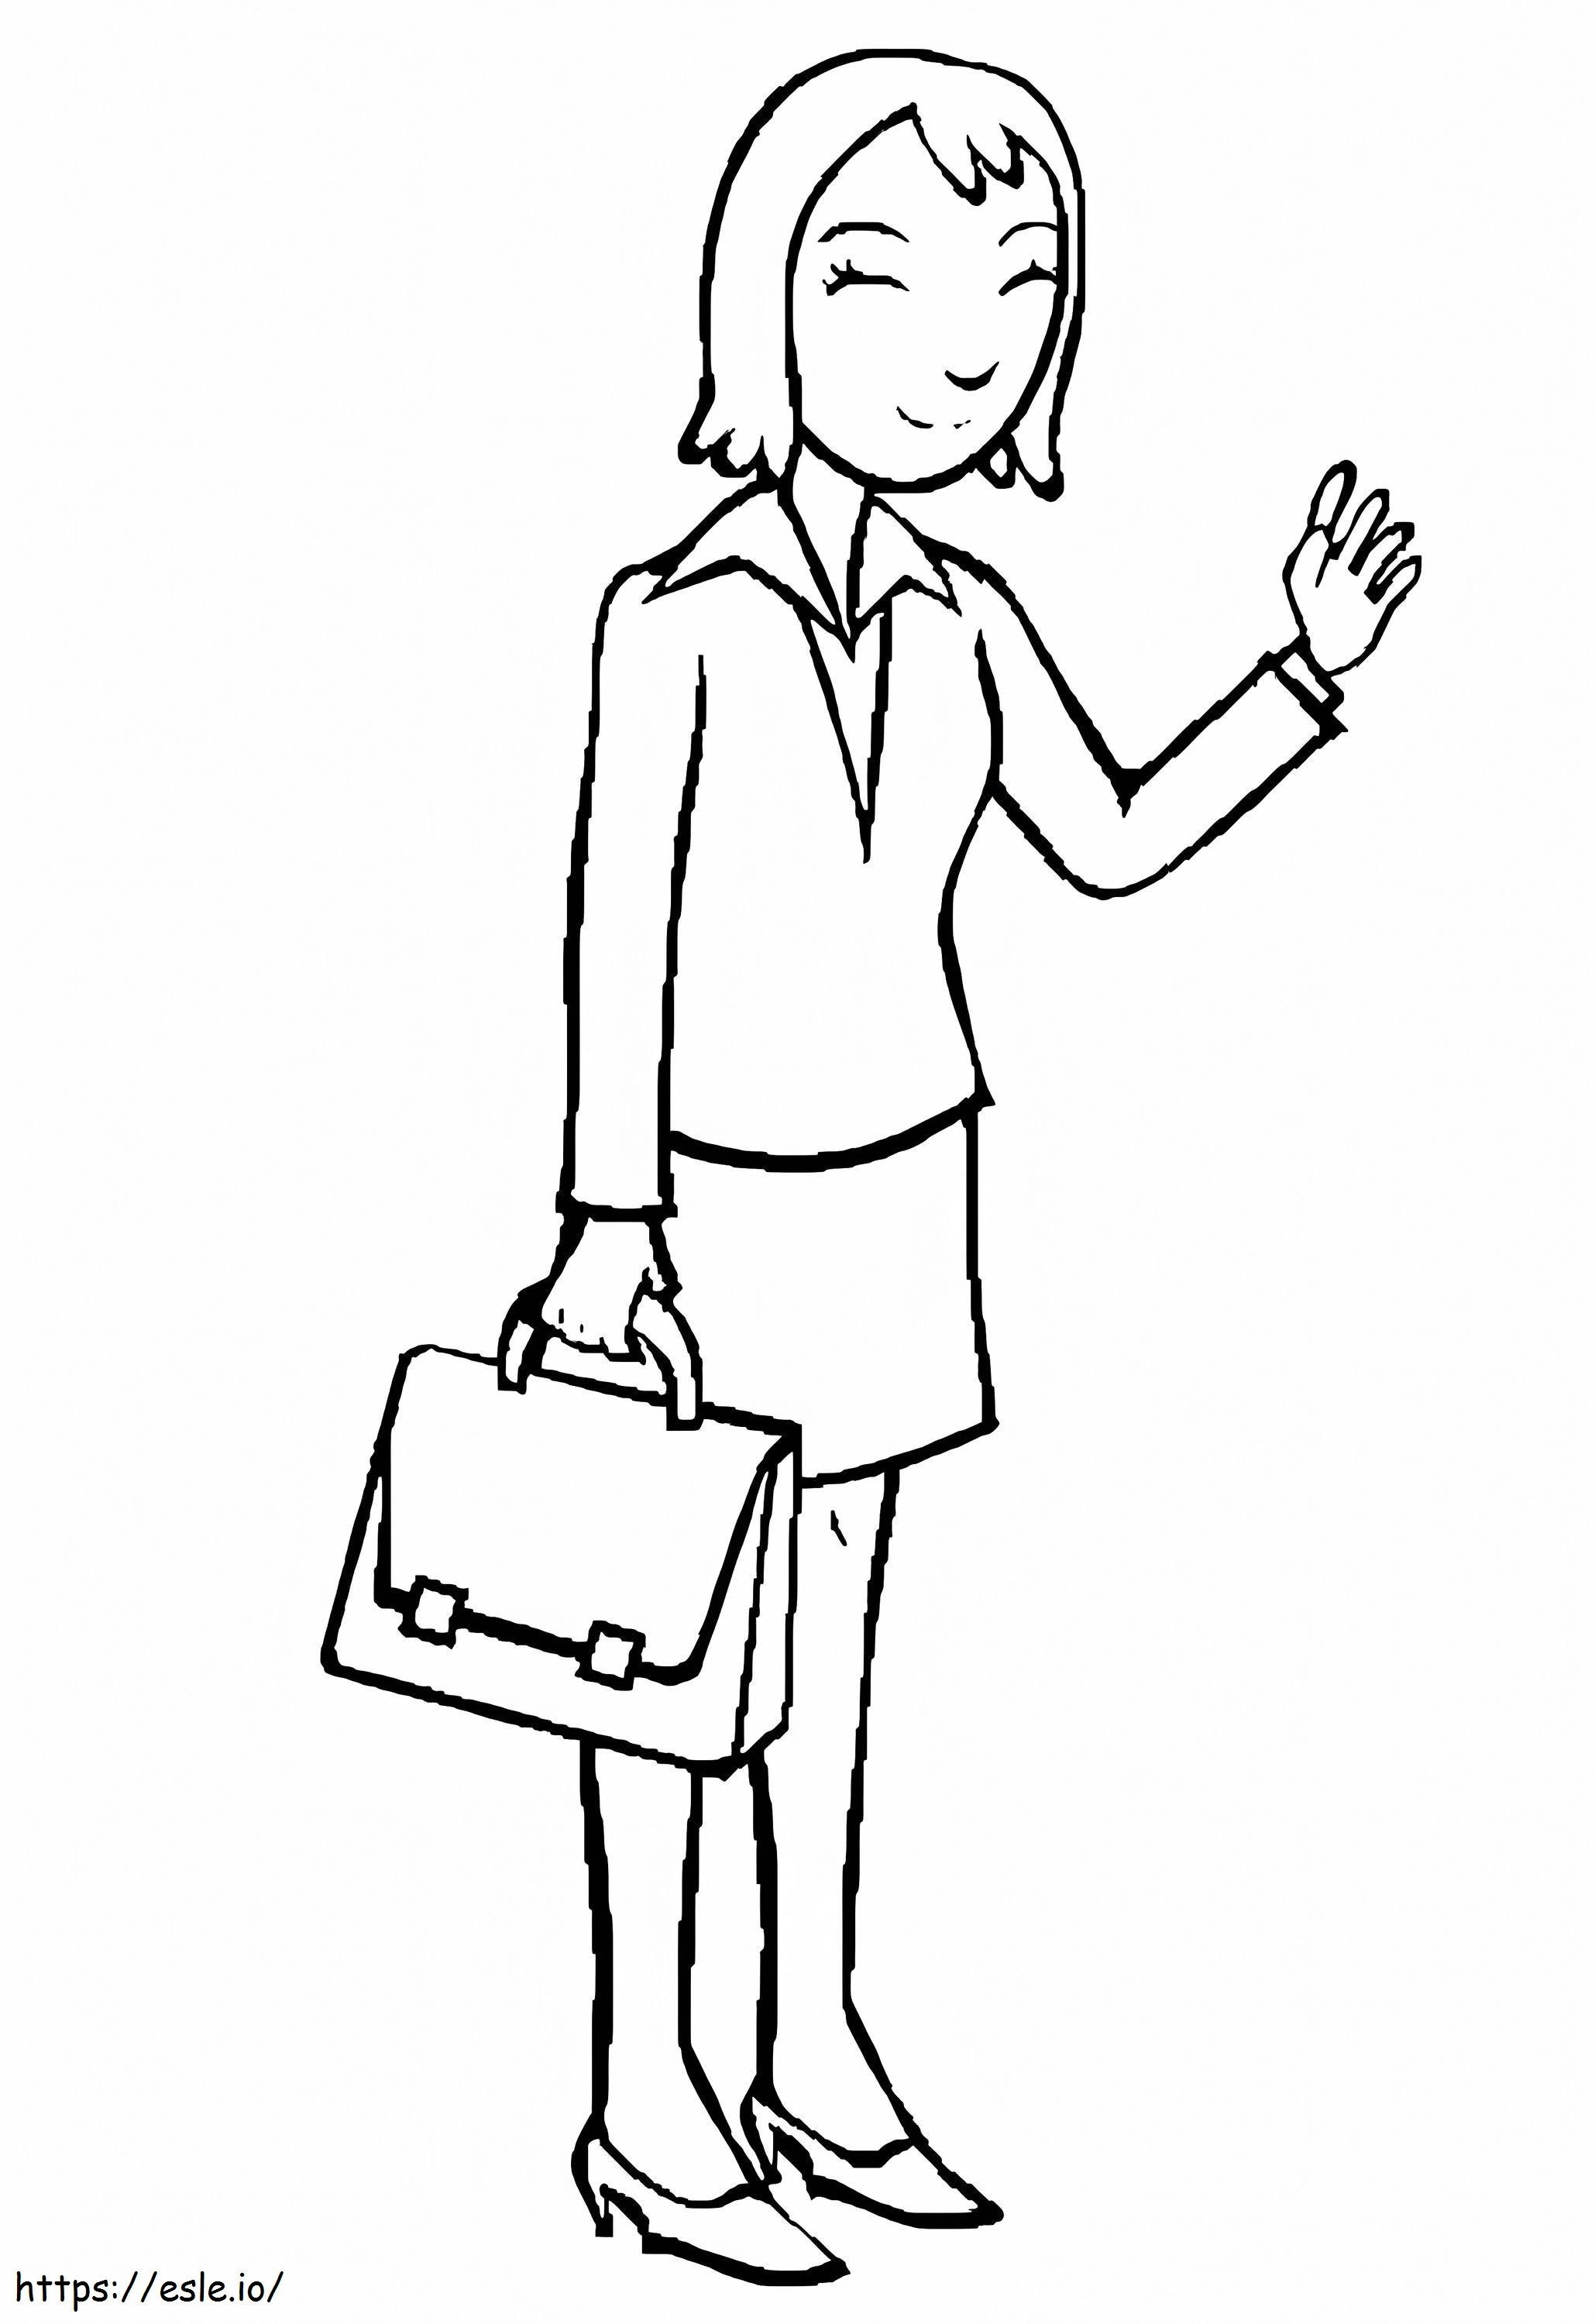 Lawyer 11 coloring page